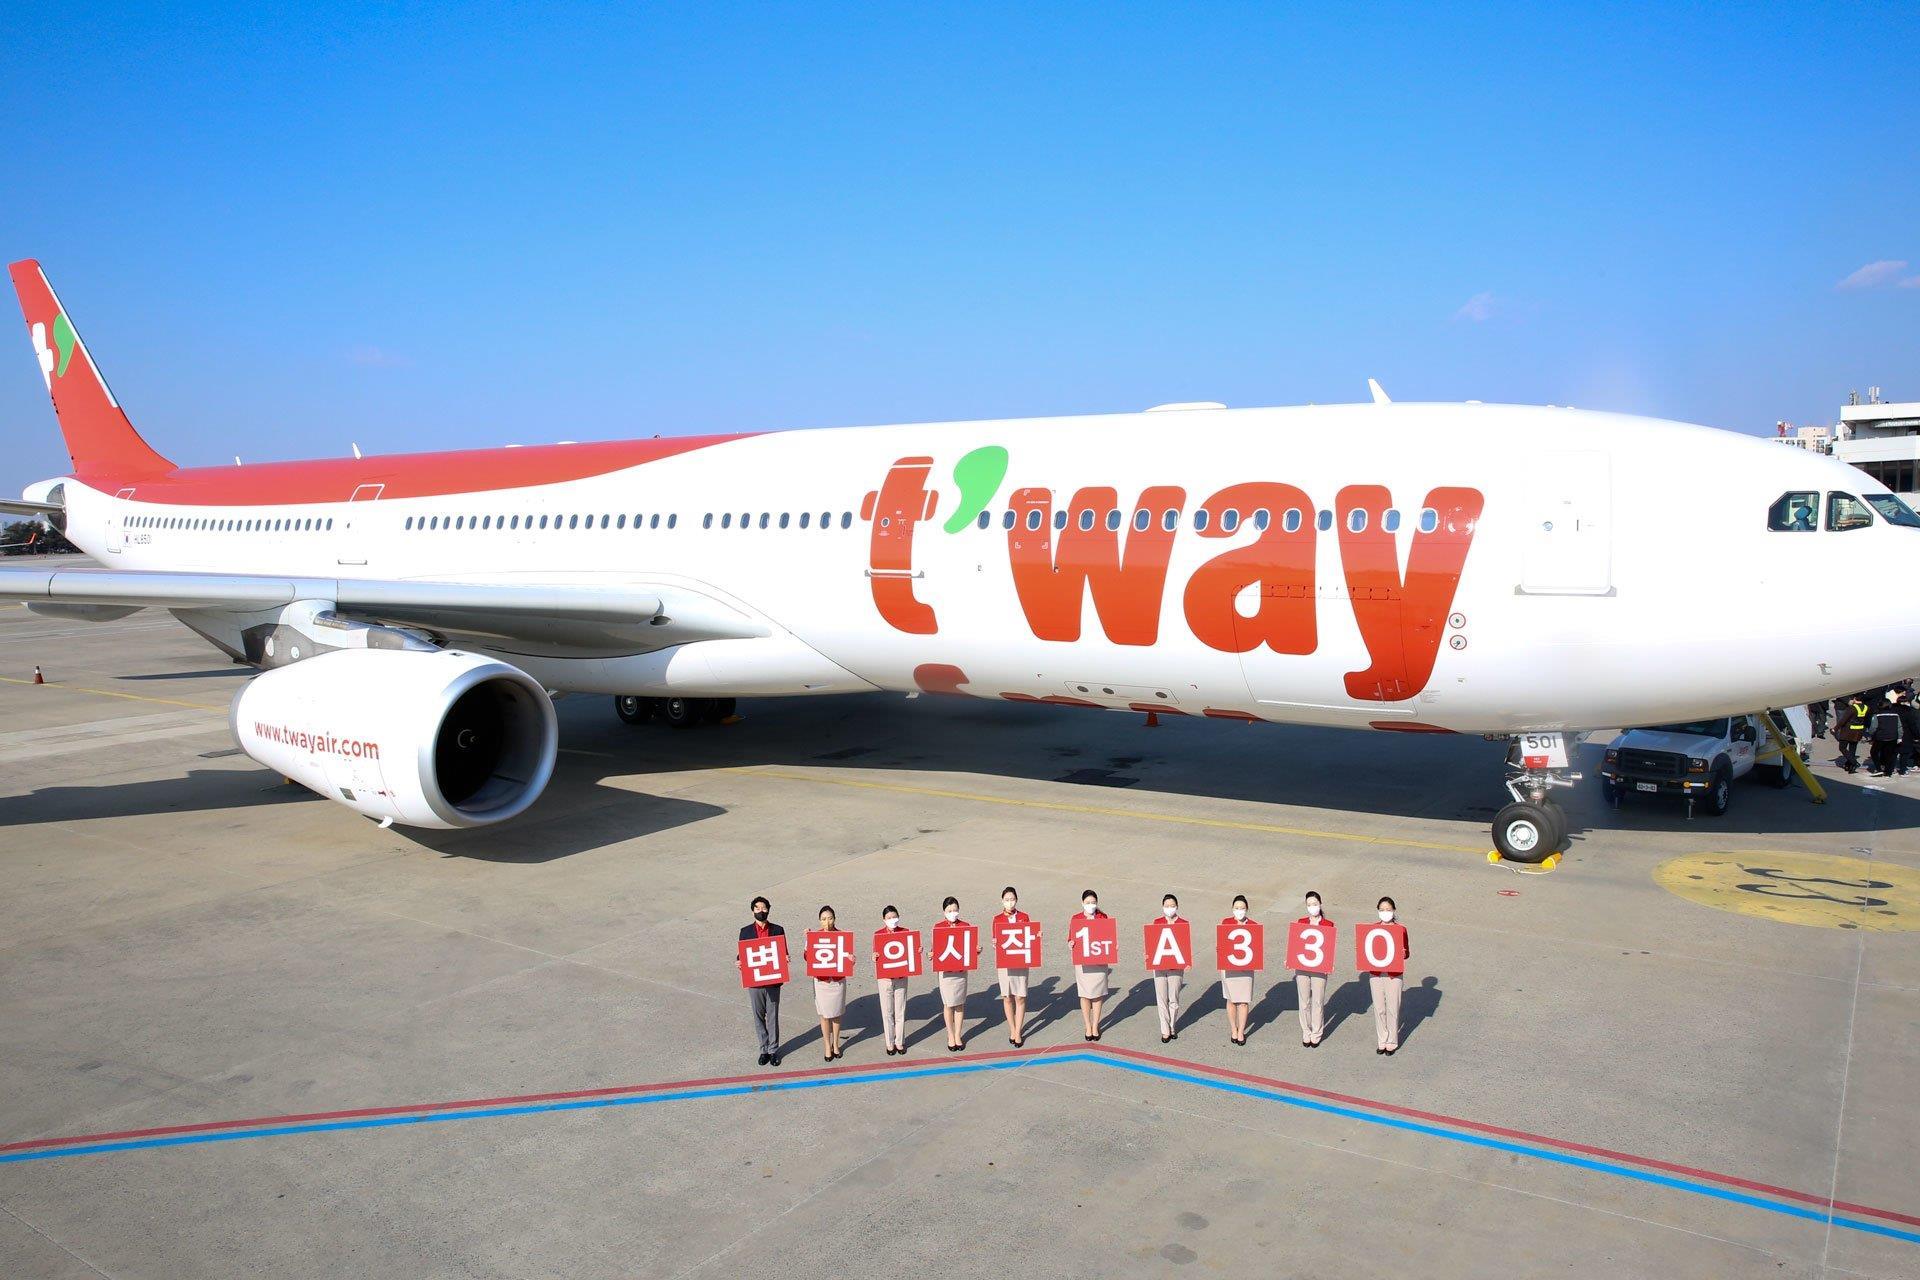 South Korea's T'way joins widebody club with A330 arrival